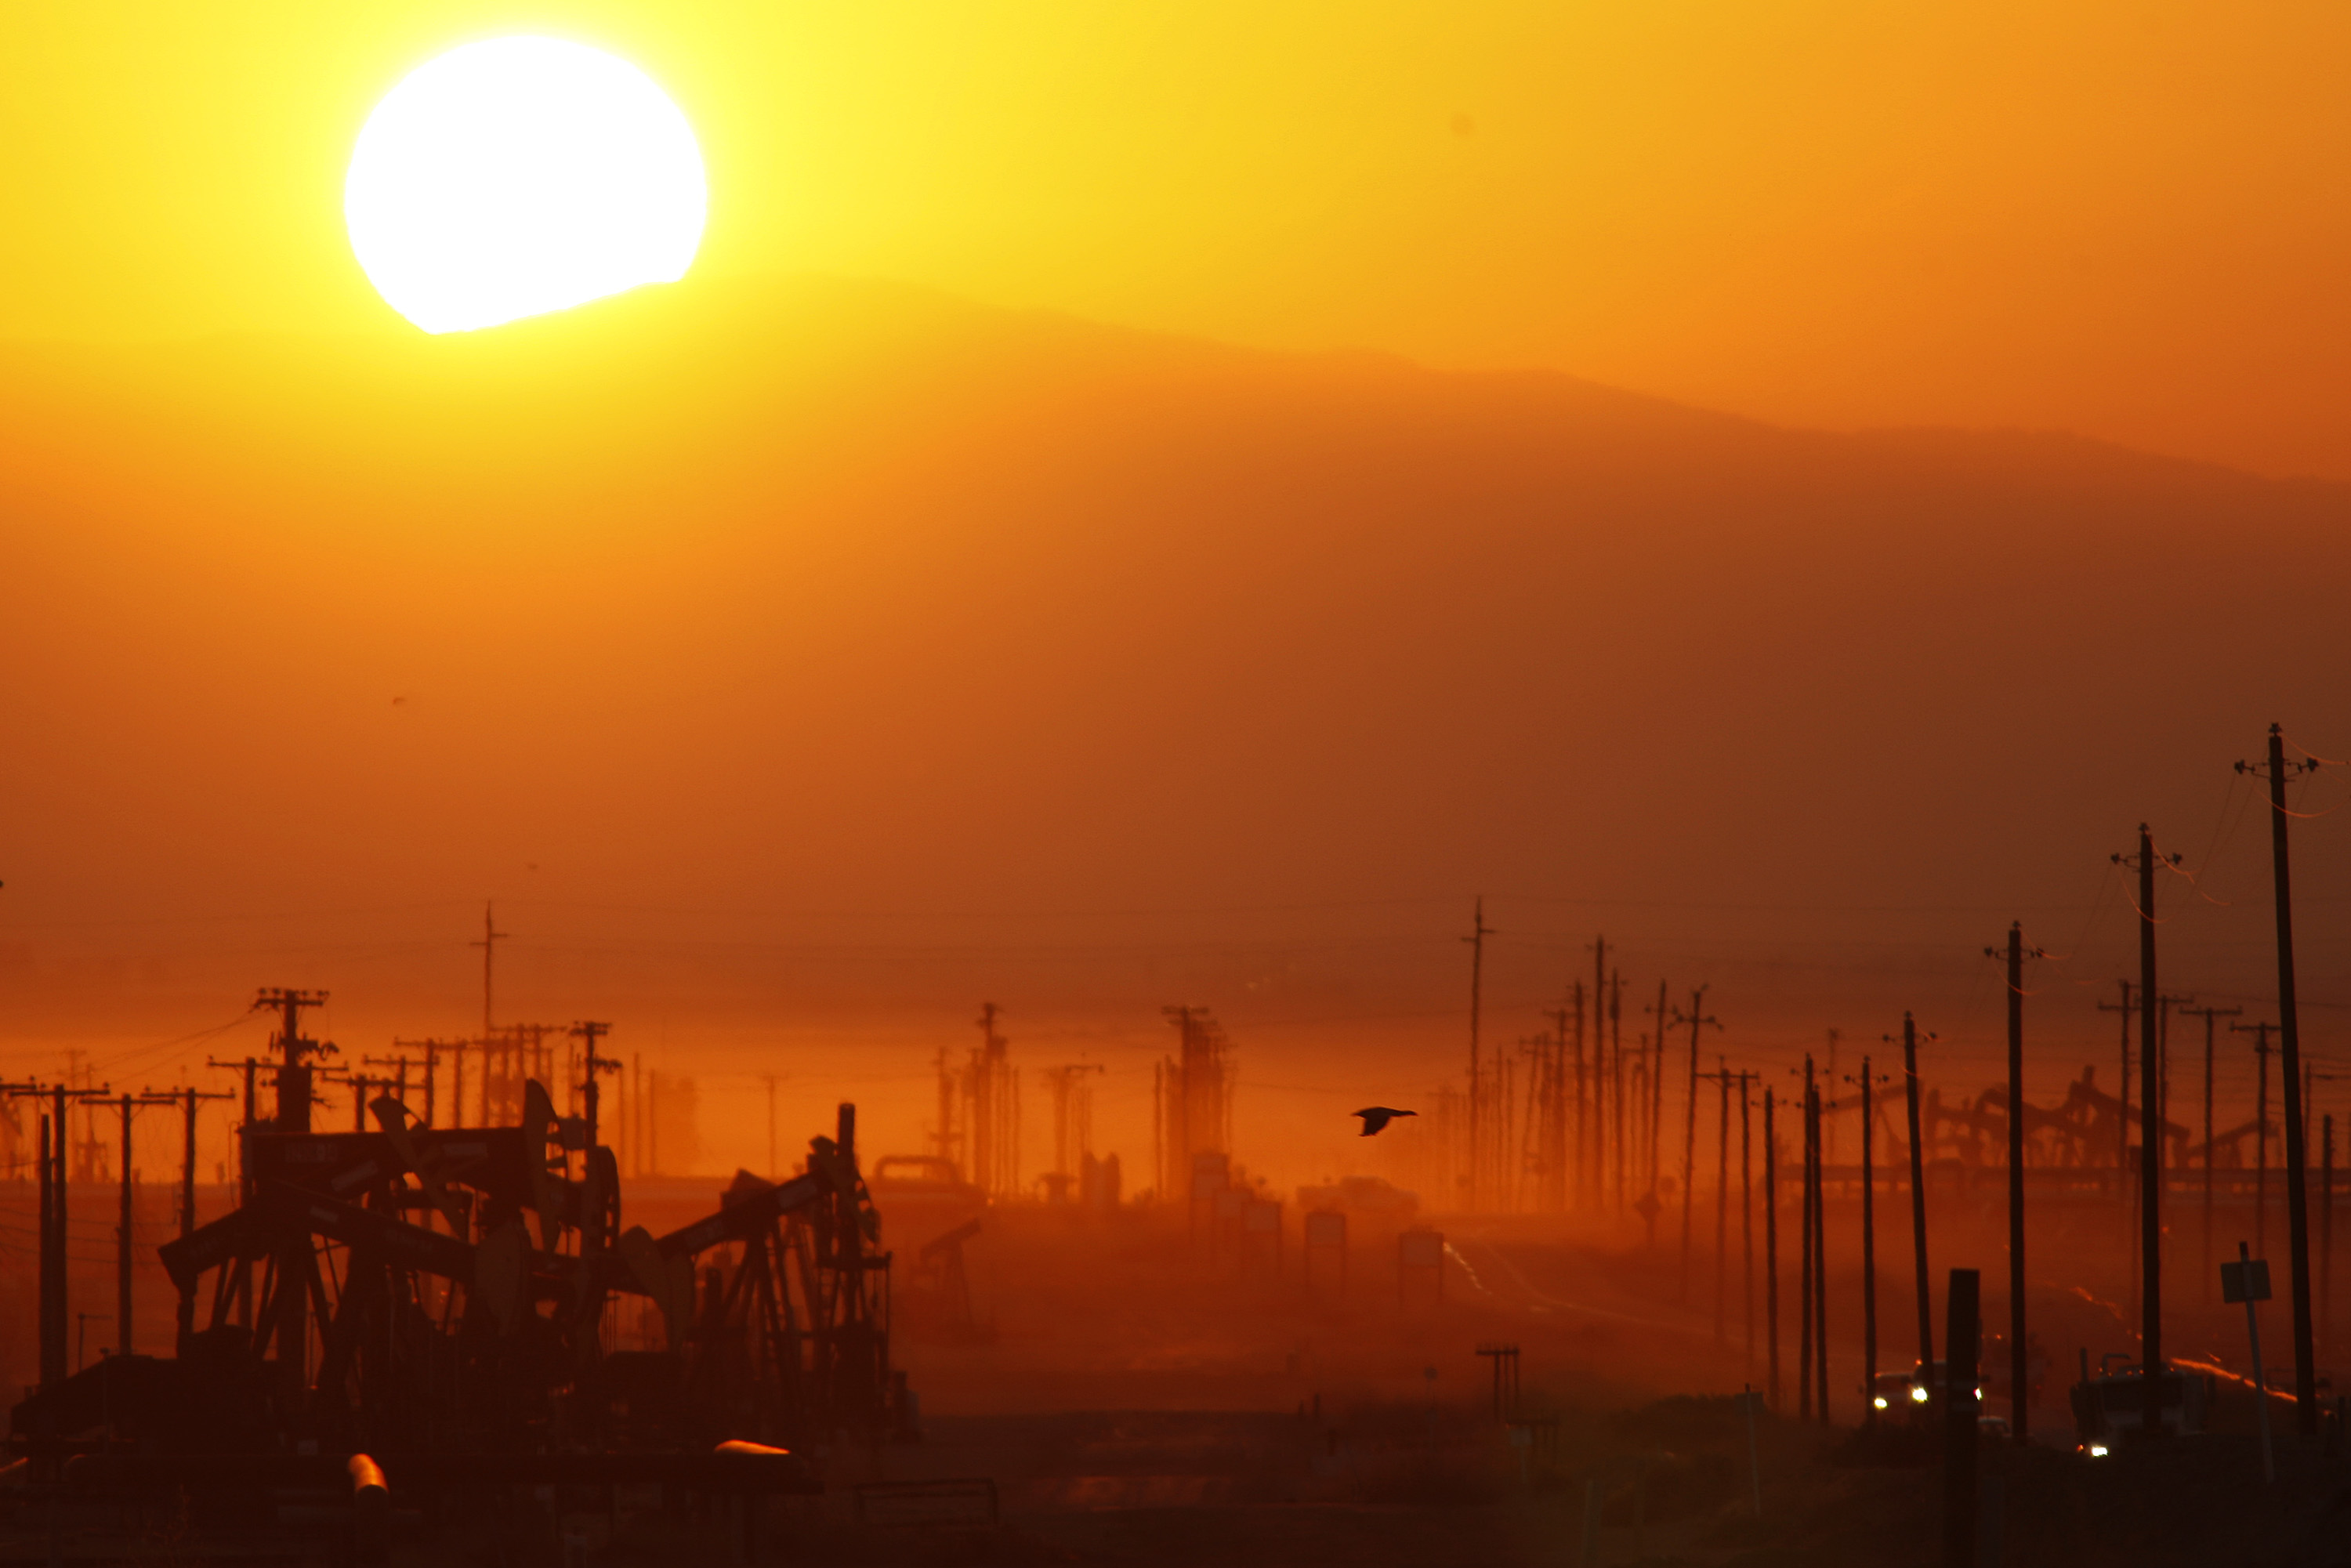 The sun rises over an oil field over the Monterey Shale formation where gas and oil extraction using hydraulic fracturing, or fracking, is on the verge of a boom on March 24, 2014 near Lost Hills, California. (David McNew—Getty Images)